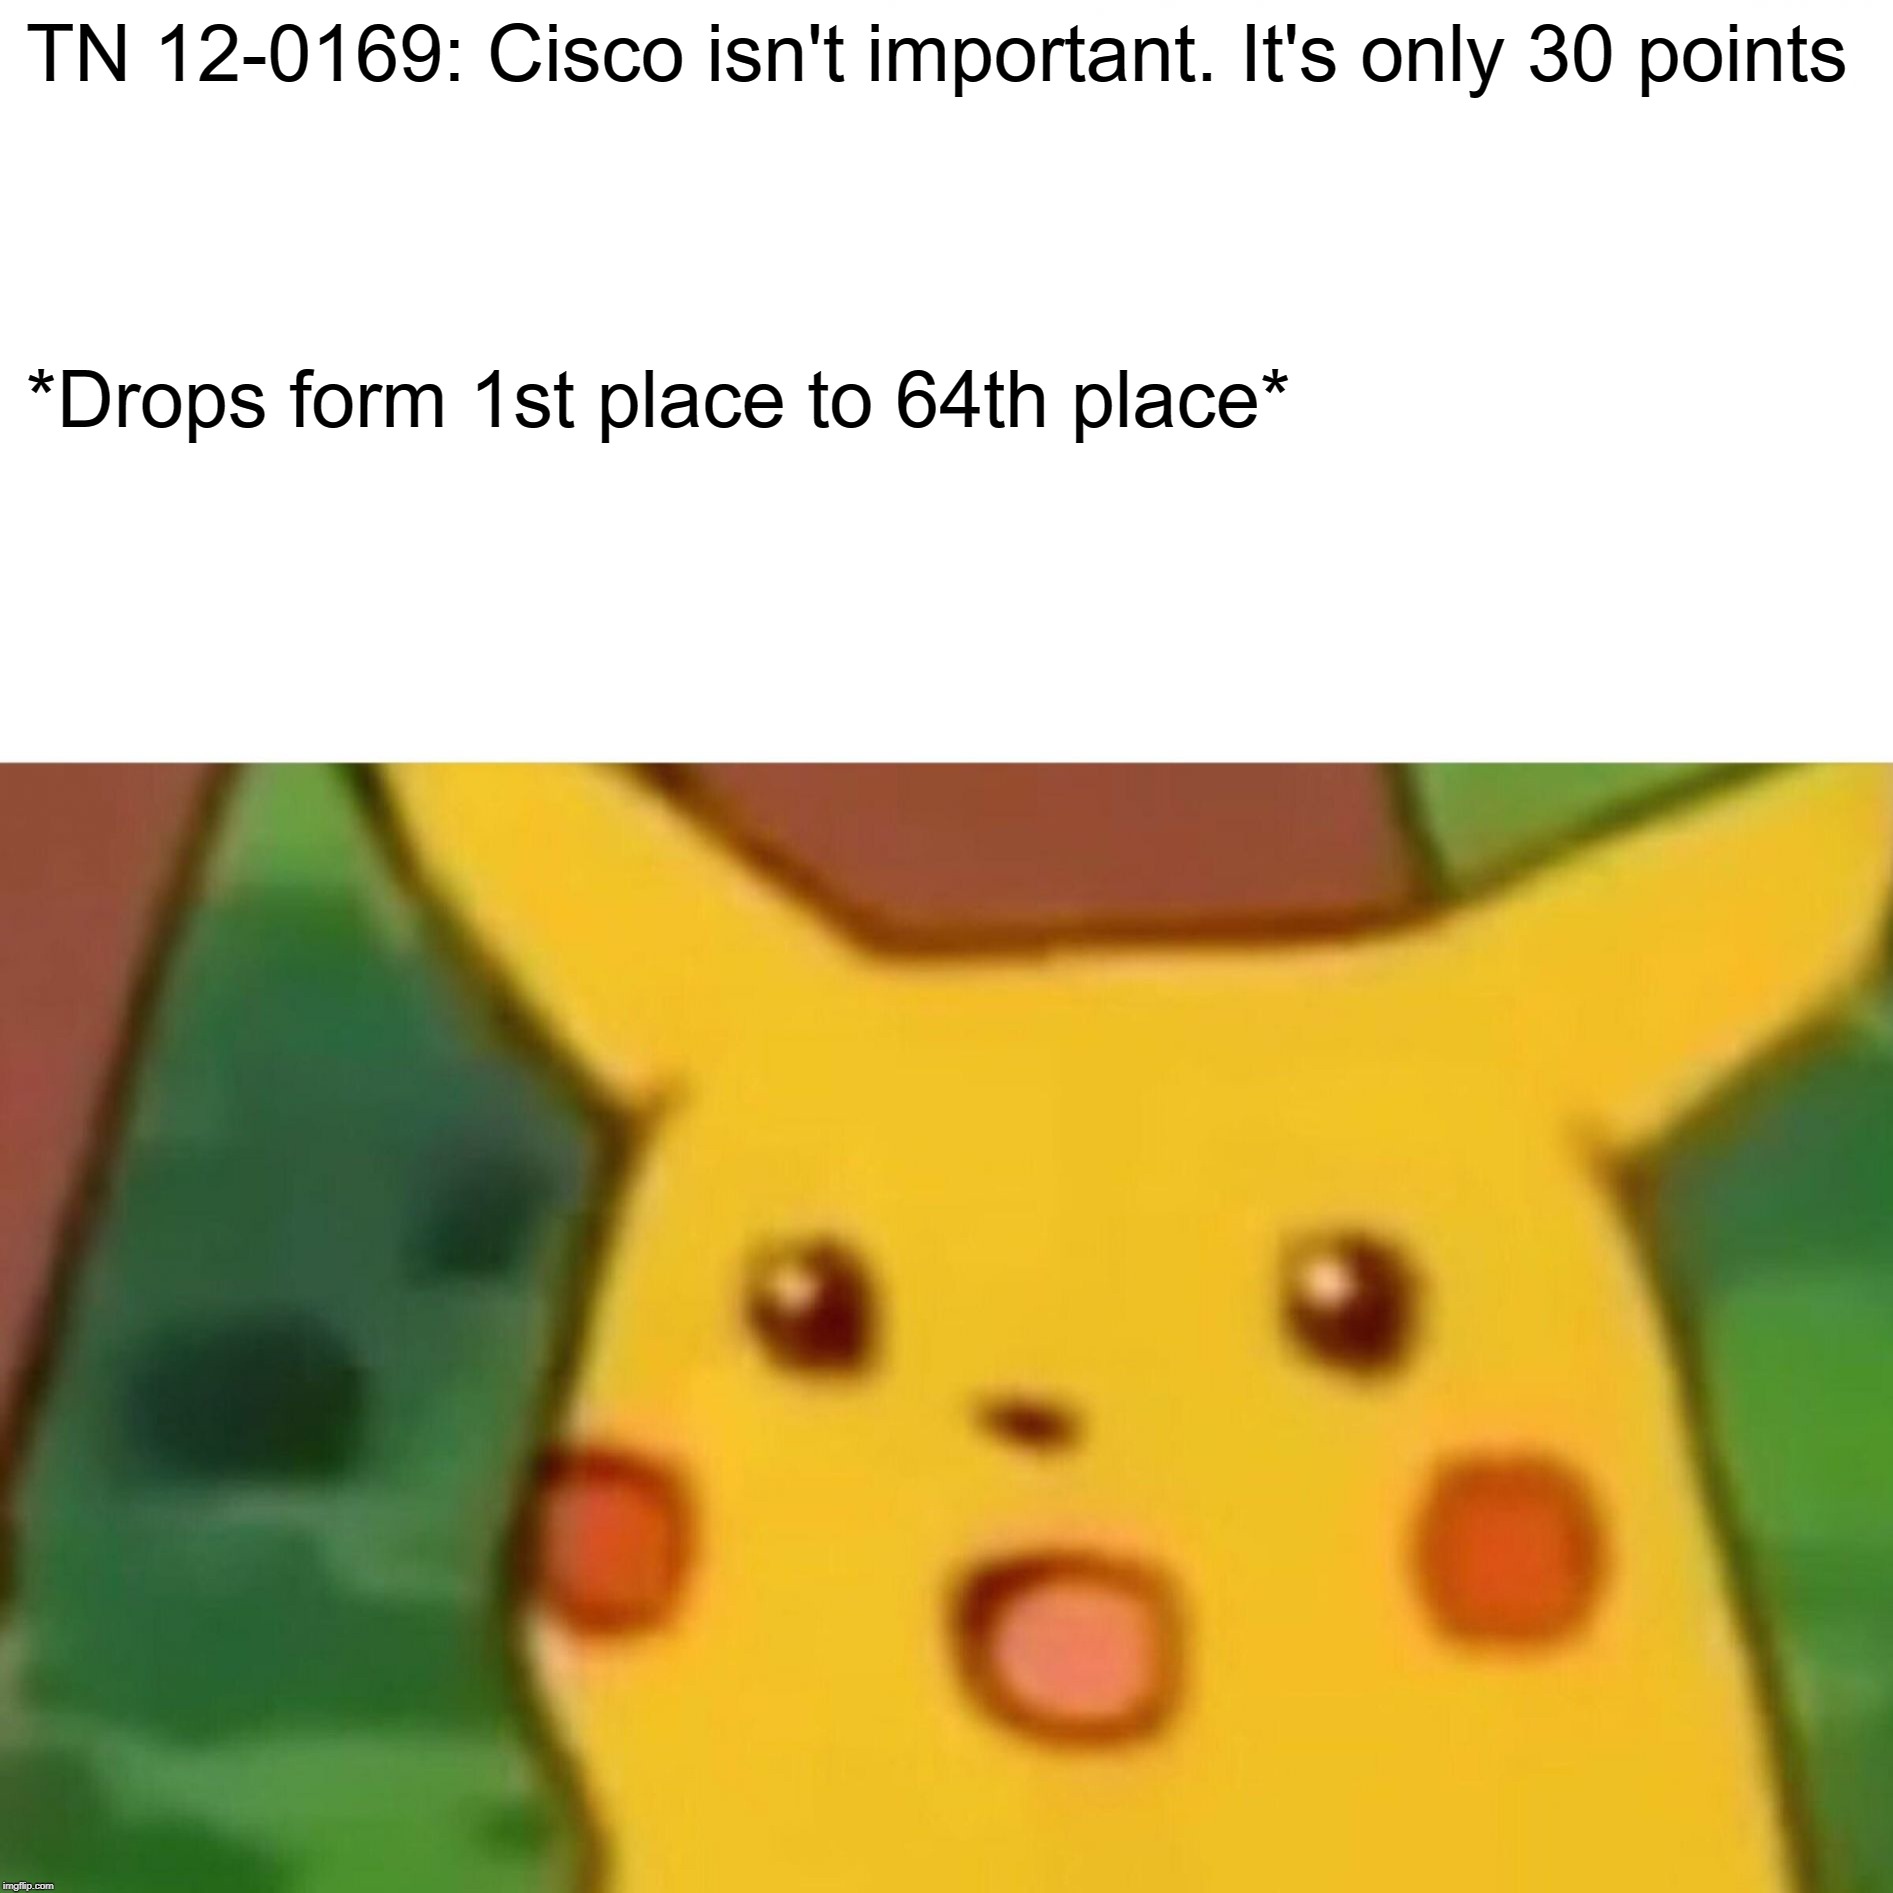 Surprised Pikachu | TN 12-0169: Cisco isn't important. It's only 30 points; *Drops form 1st place to 64th place* | image tagged in memes,surprised pikachu | made w/ Imgflip meme maker